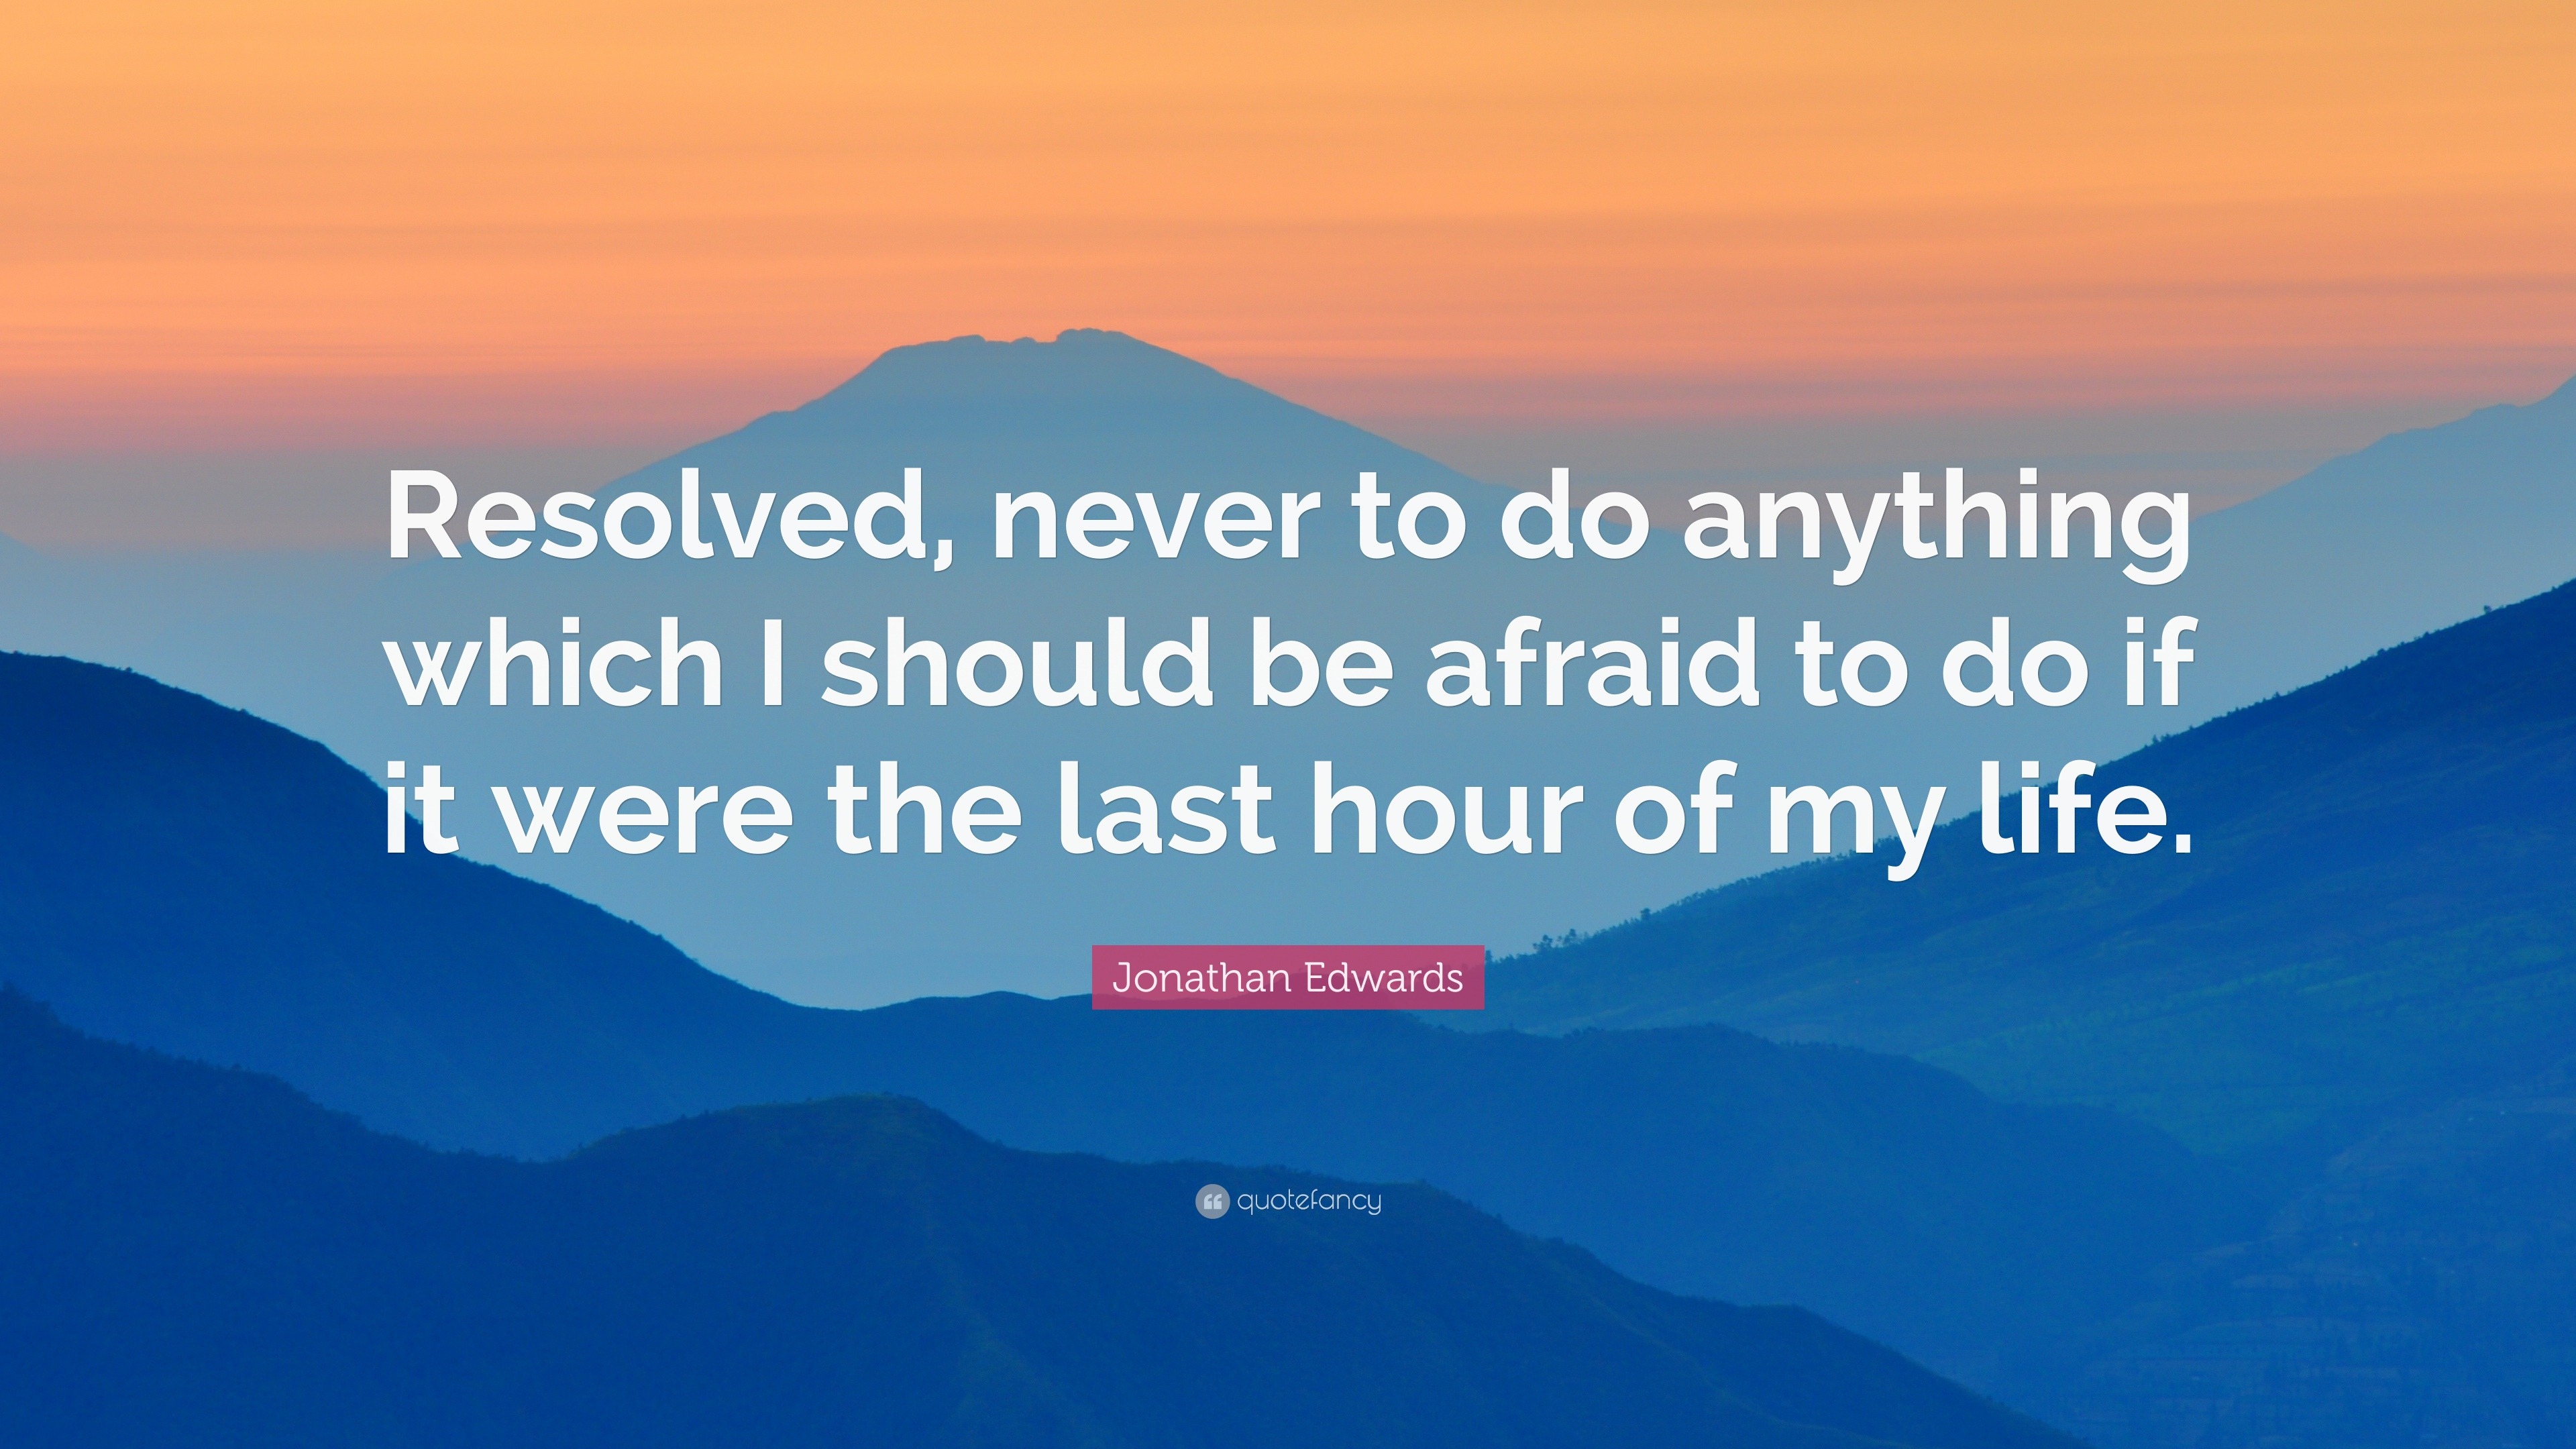 Jonathan Edwards Quotes (100 wallpapers) - Quotefancy